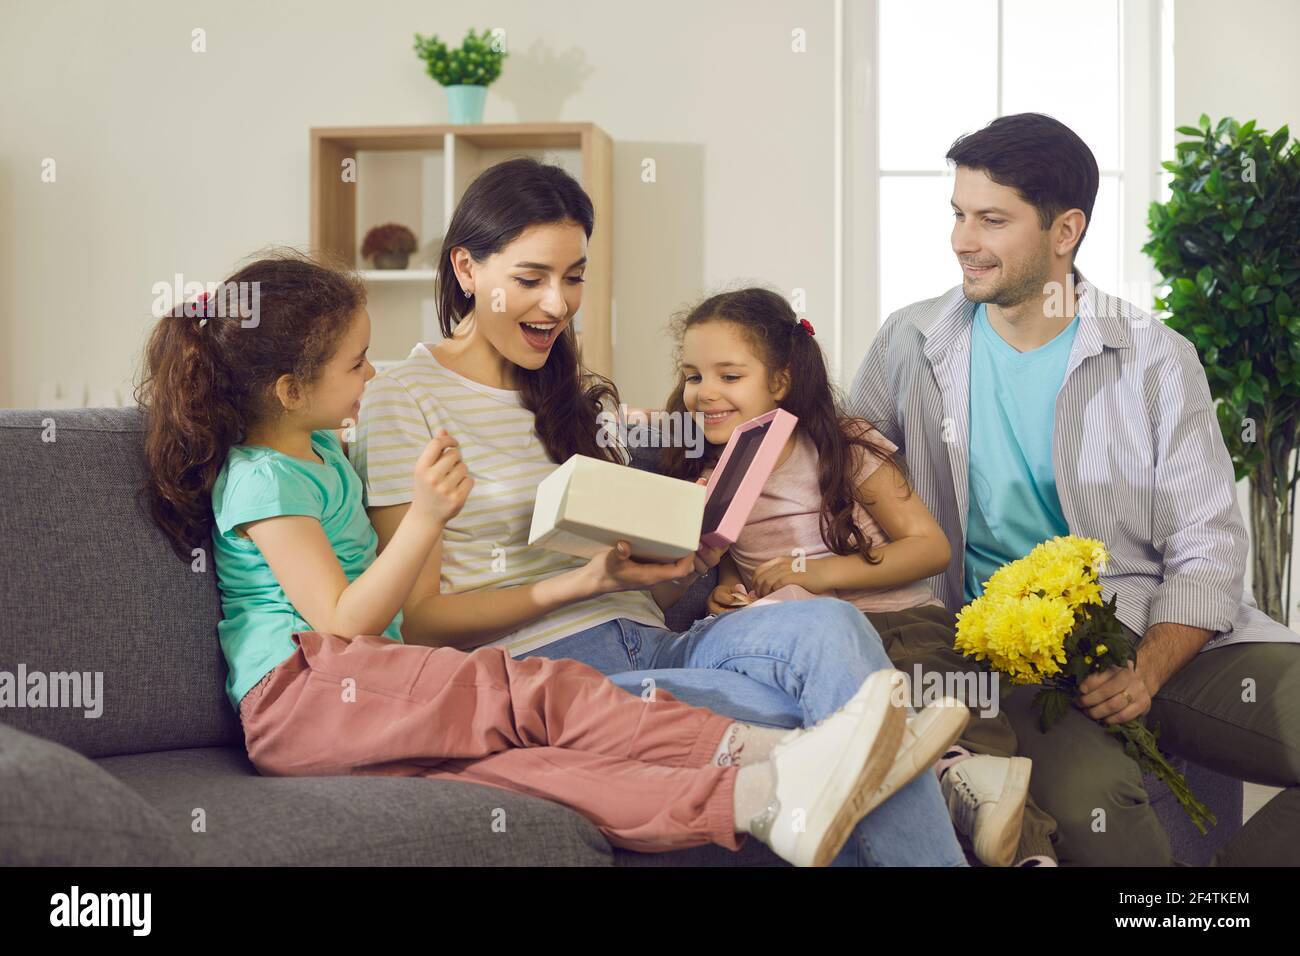 Pleasant surprised mom with happy expression opening gift box from kids Stock Photo